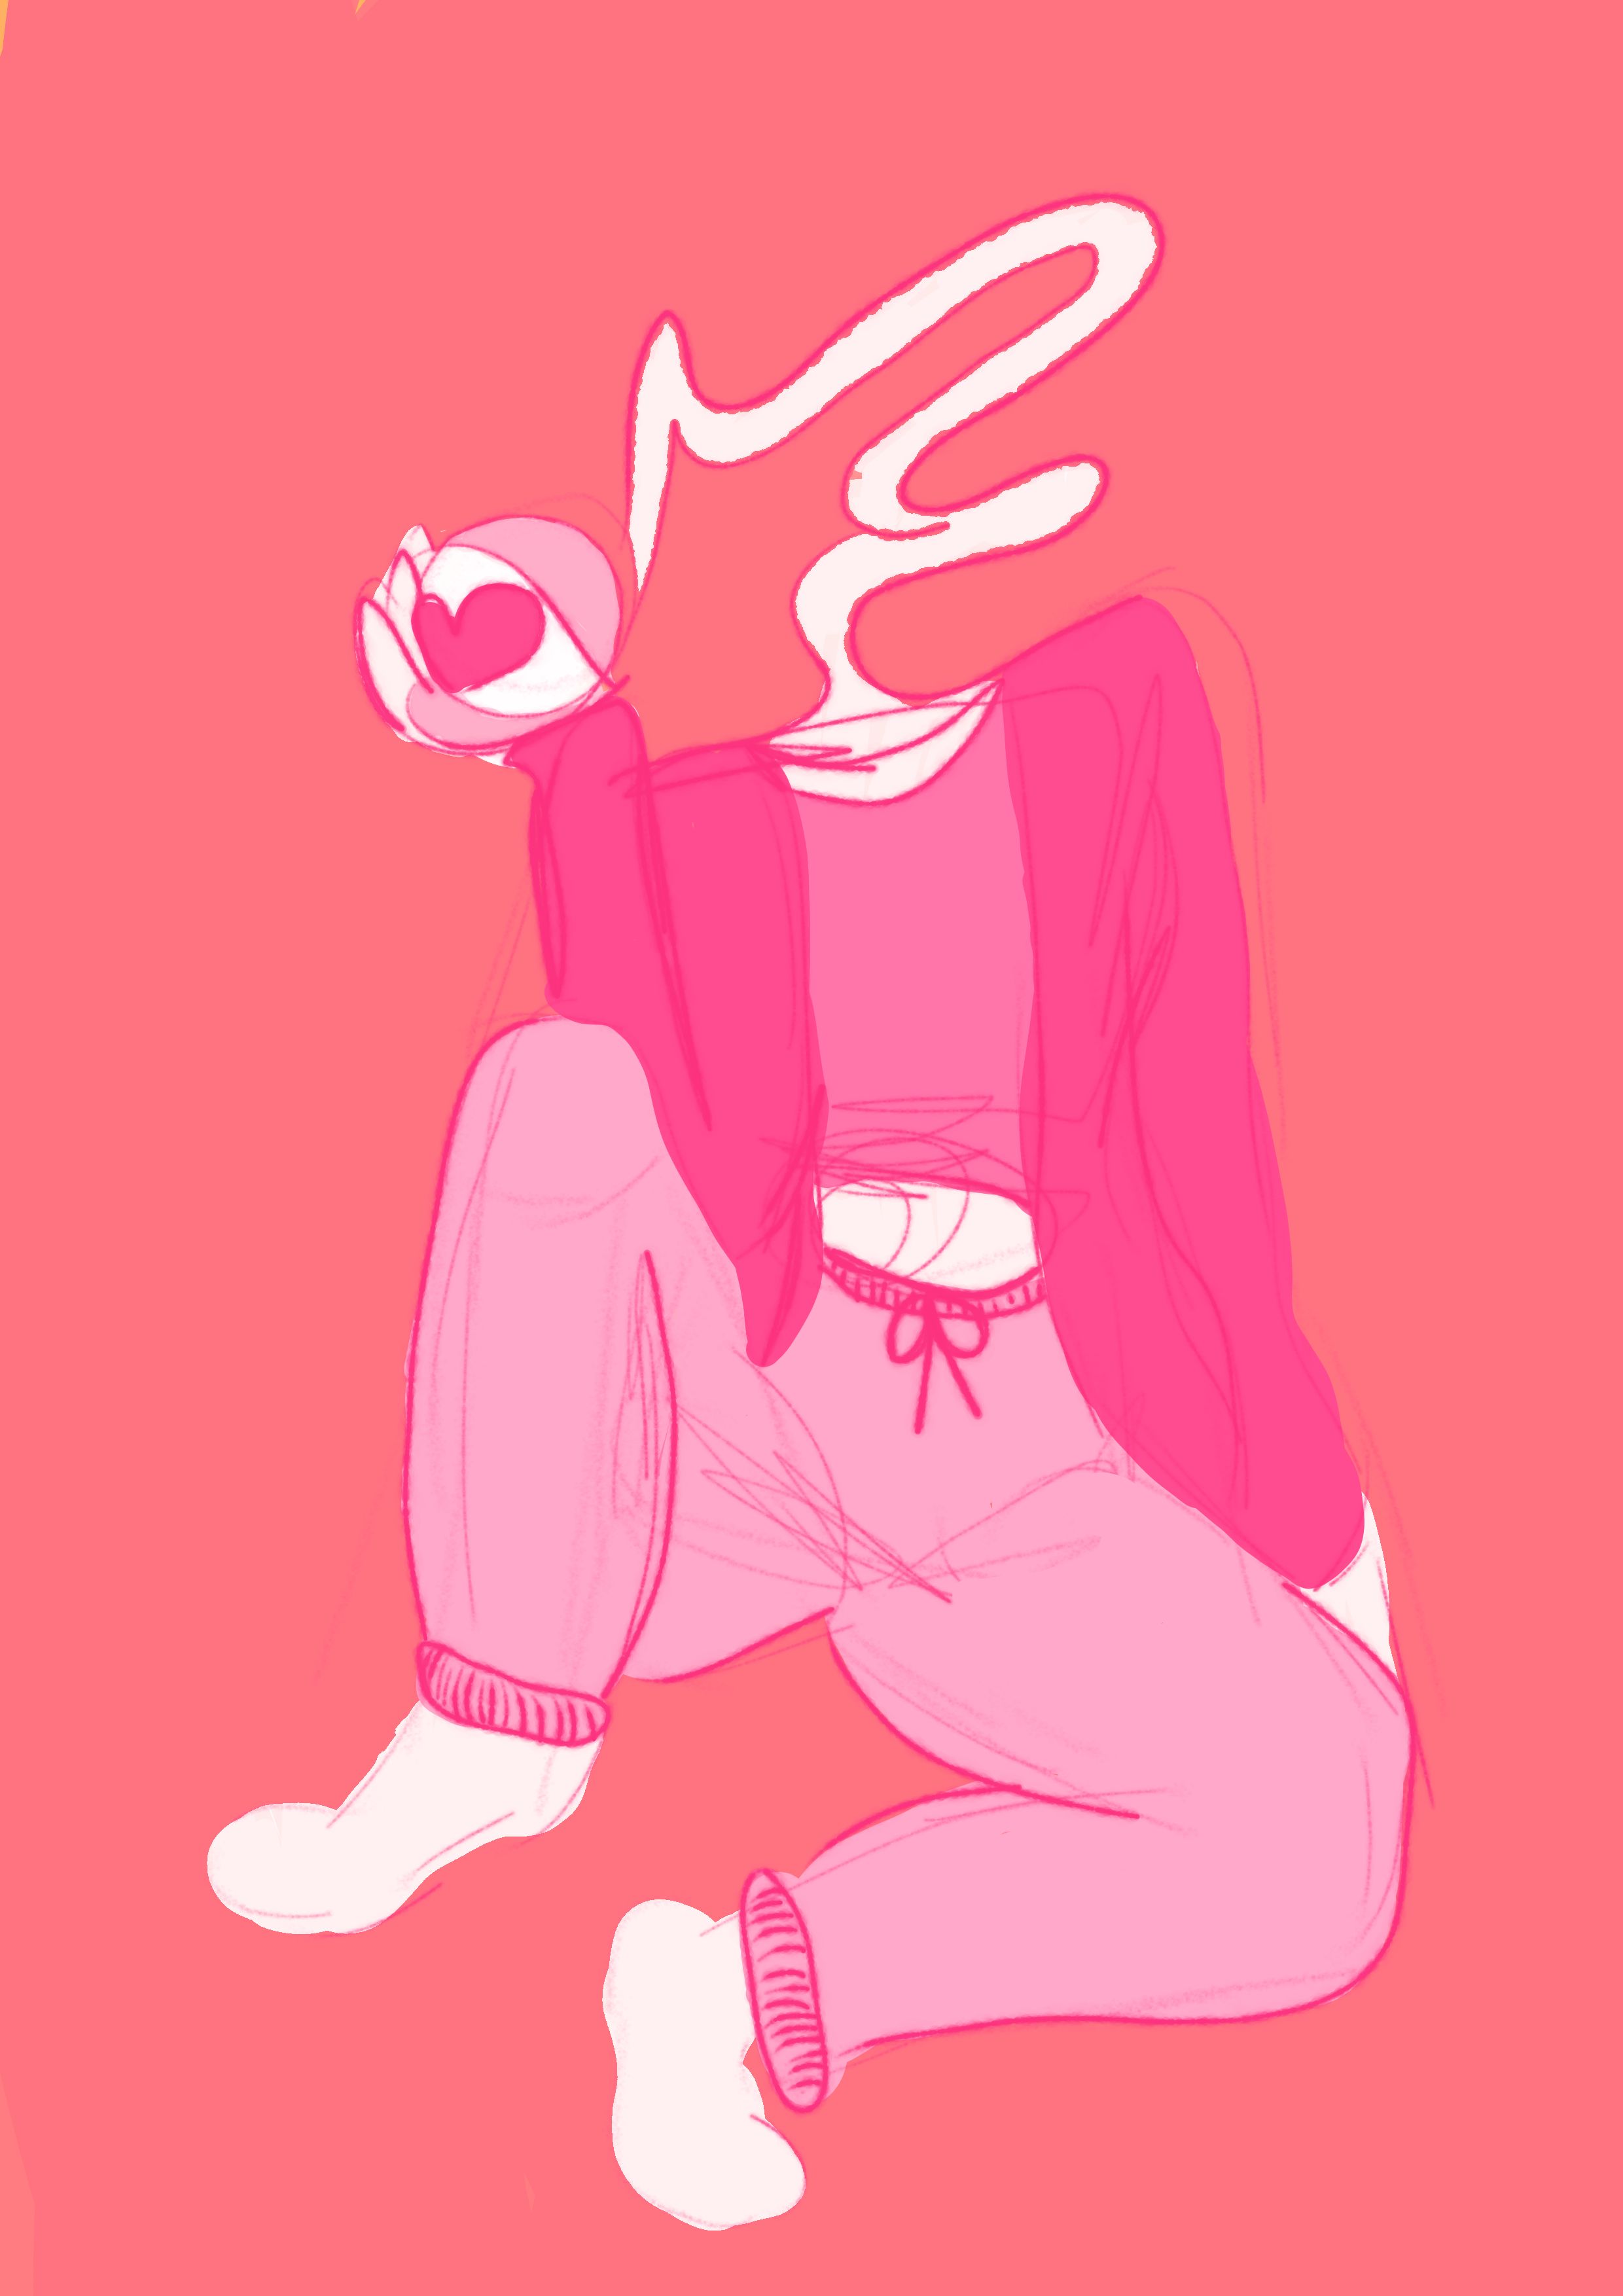 drawing of a character in pink sweat pants a pink sweater and a pink shirt, she has an eye for a head and her neck is long like a worm.